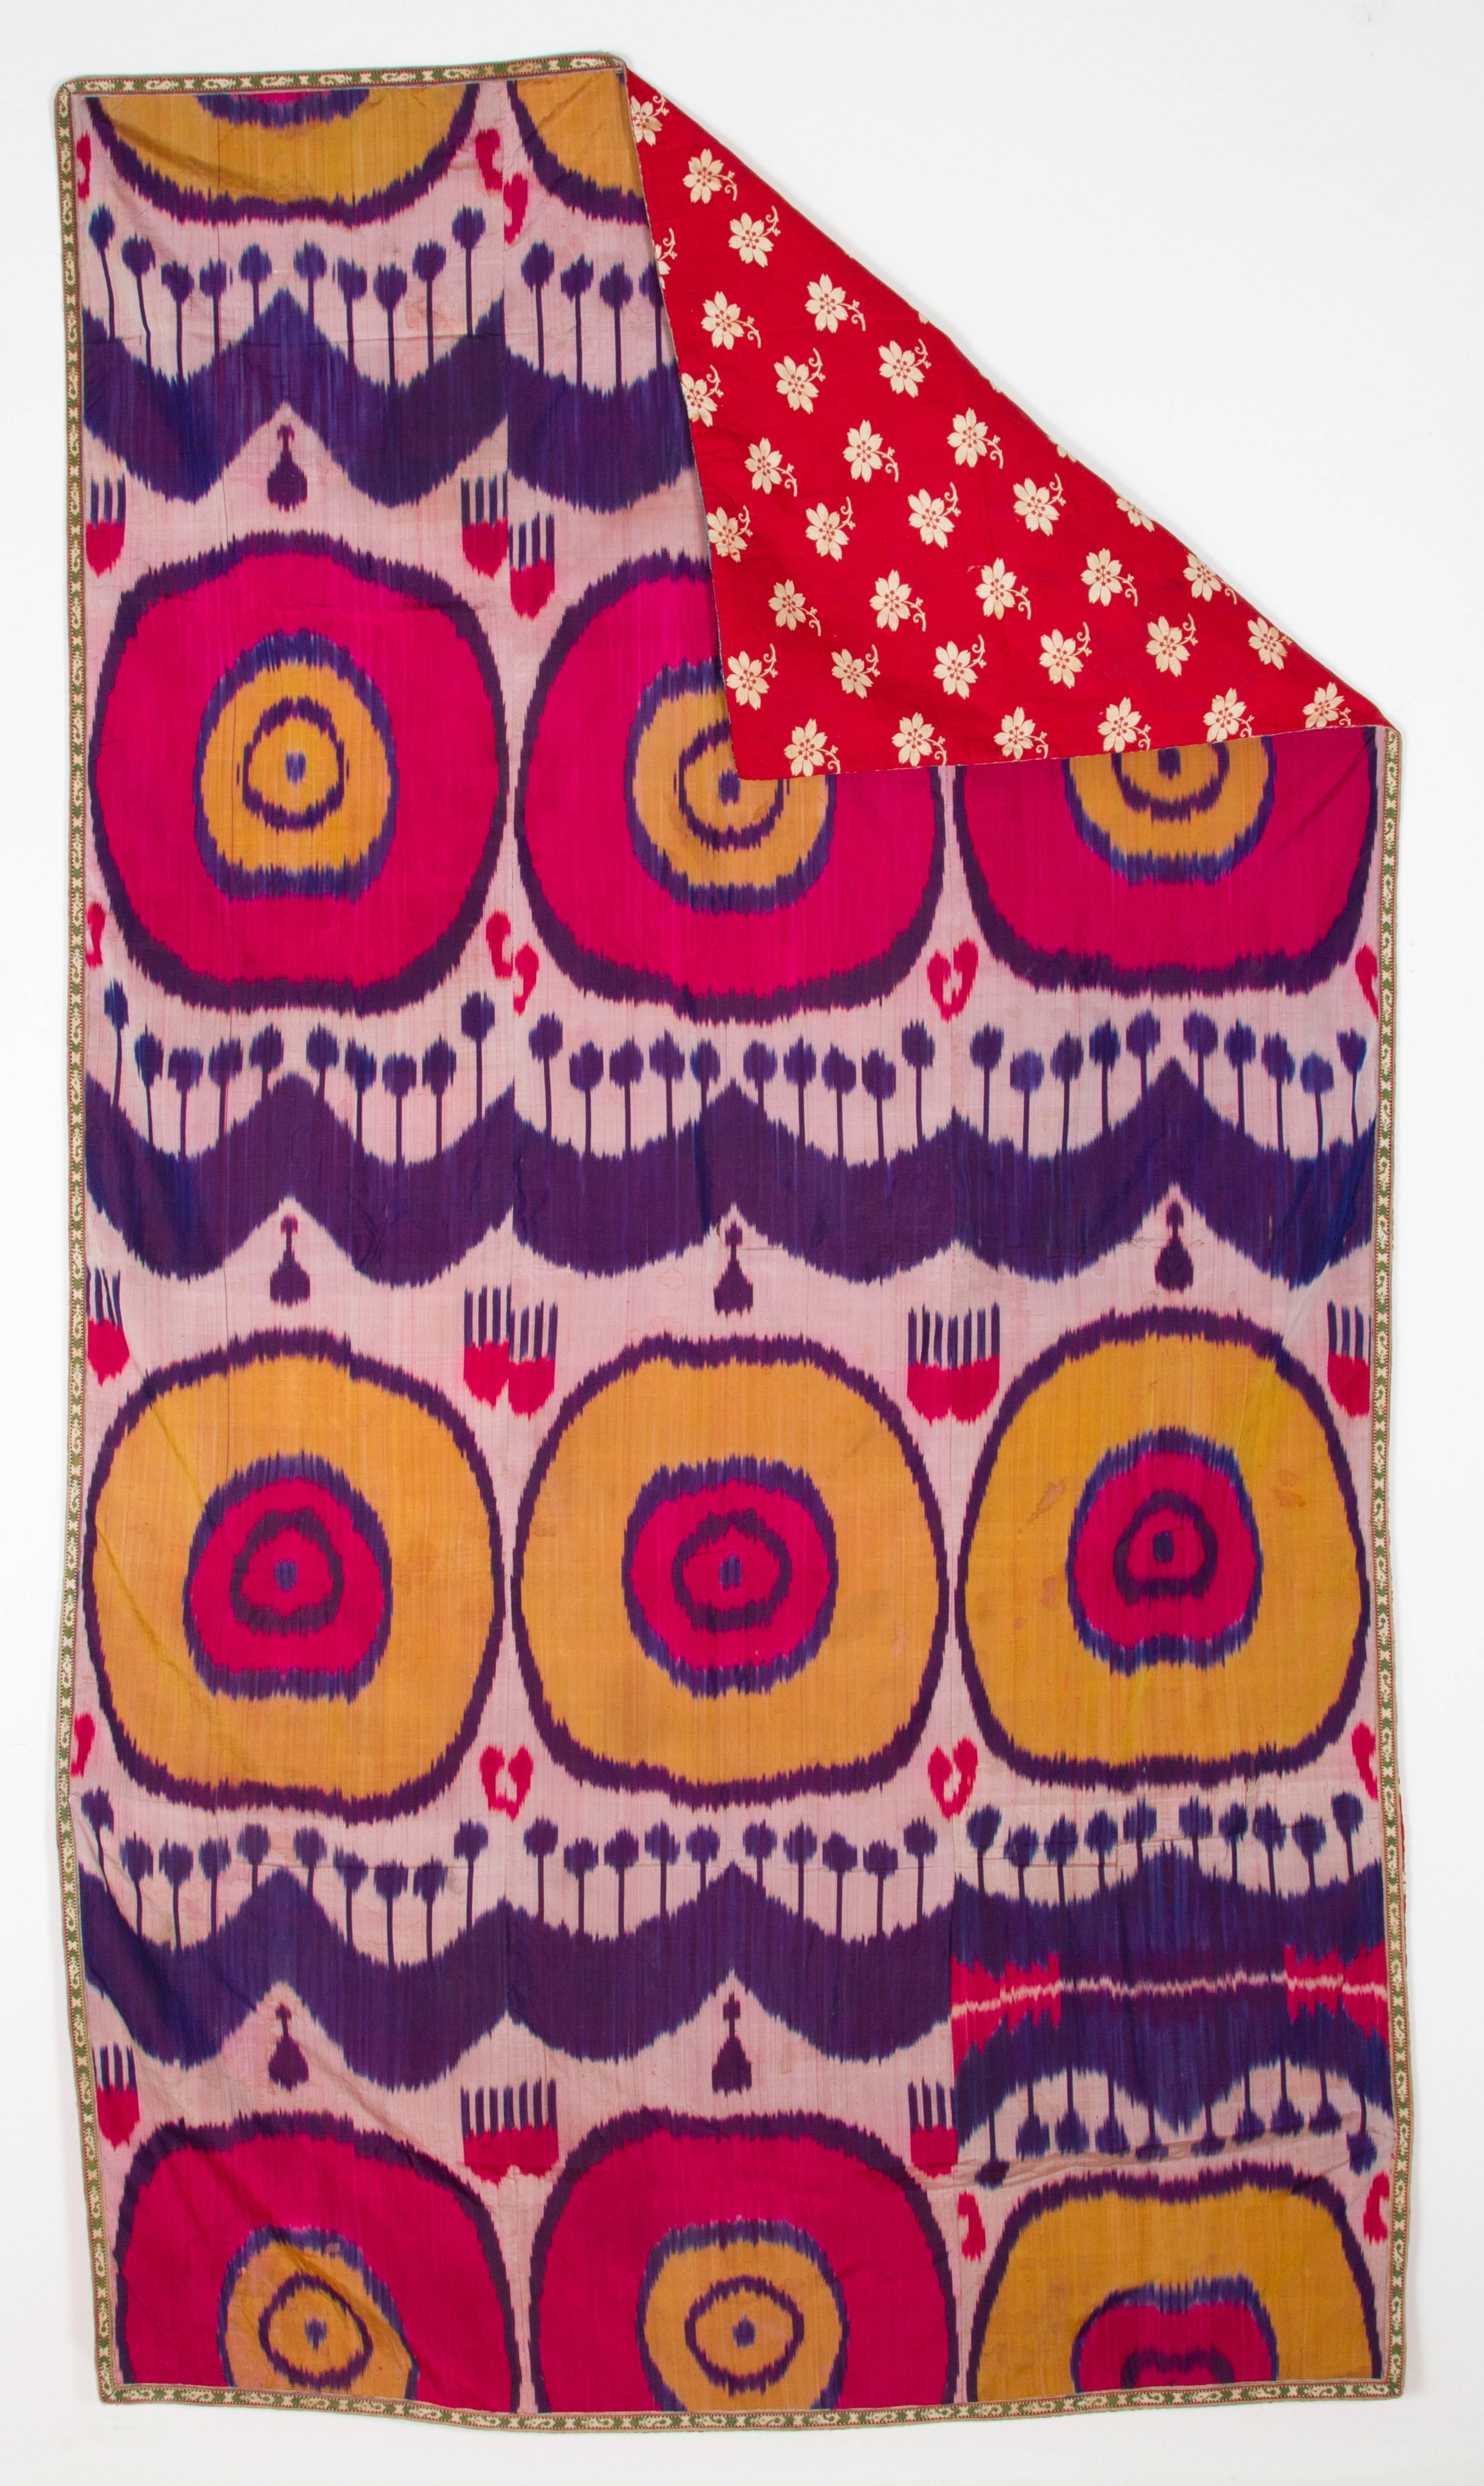 19th century antique silk Ikat throw, this Ikat design from the 19th century has vibrant pink, purple and yellow design on off-white background with red cotton backing and embroidered edging. This piece could look like a modern pop art